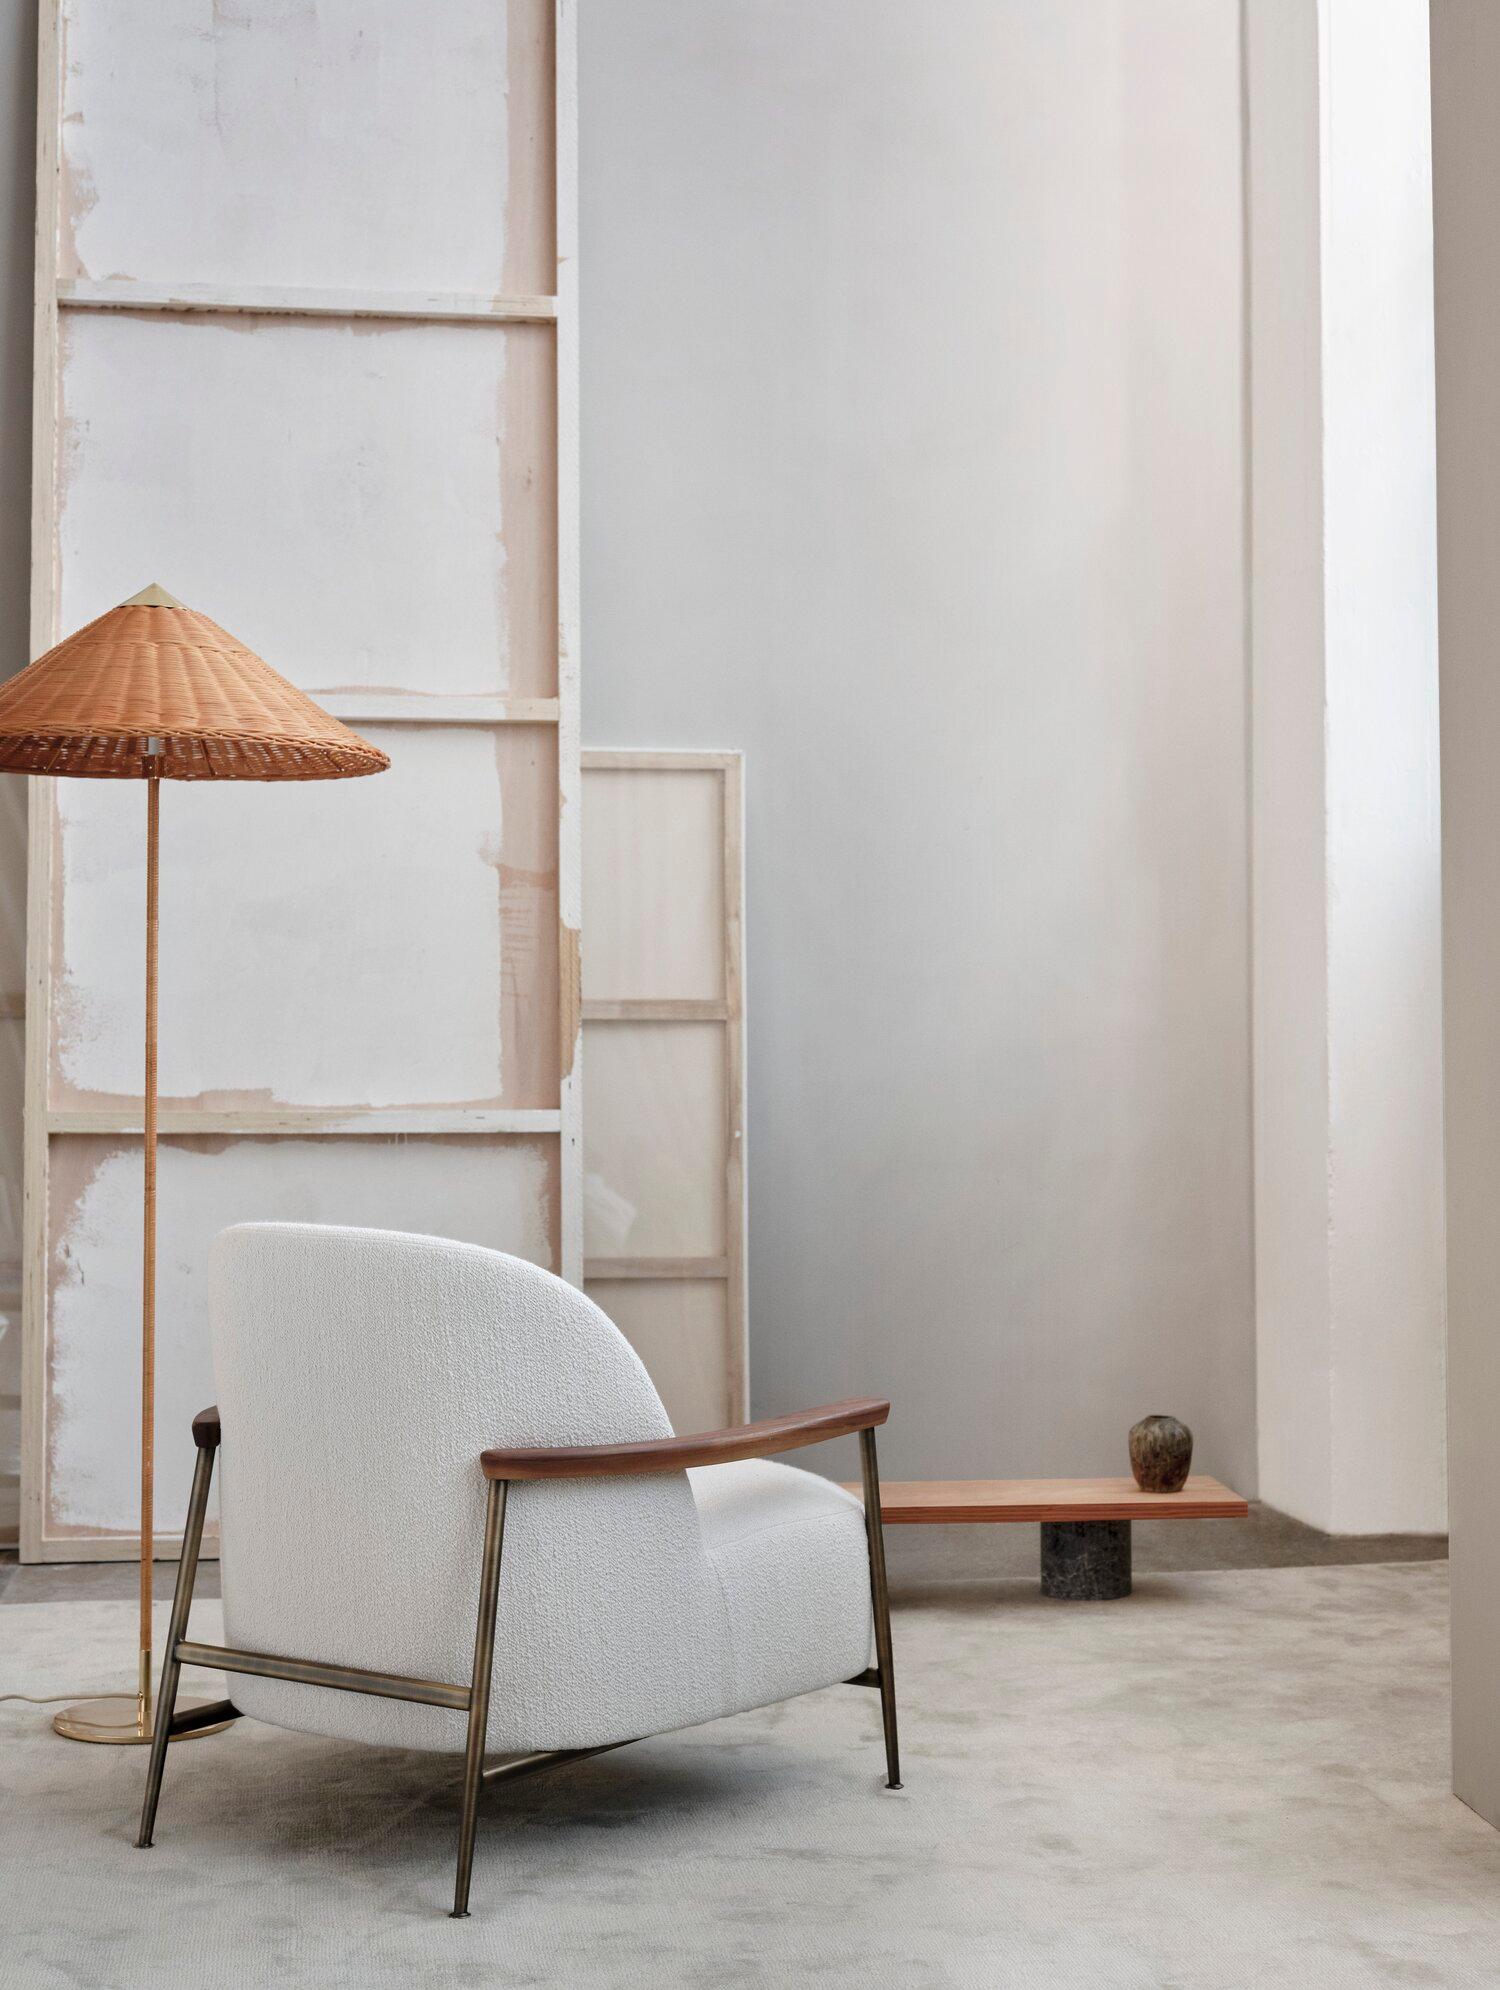 The 9602 floor lamp, also known as “Chinese Hat” was designed by Paavo Tynell in 1938 for the hotel Aulanko. Characterised by its elegant and airy lampshade and rattan-covered stem, the 9602 Floor Lamp shows the designer’s limitless imagination and